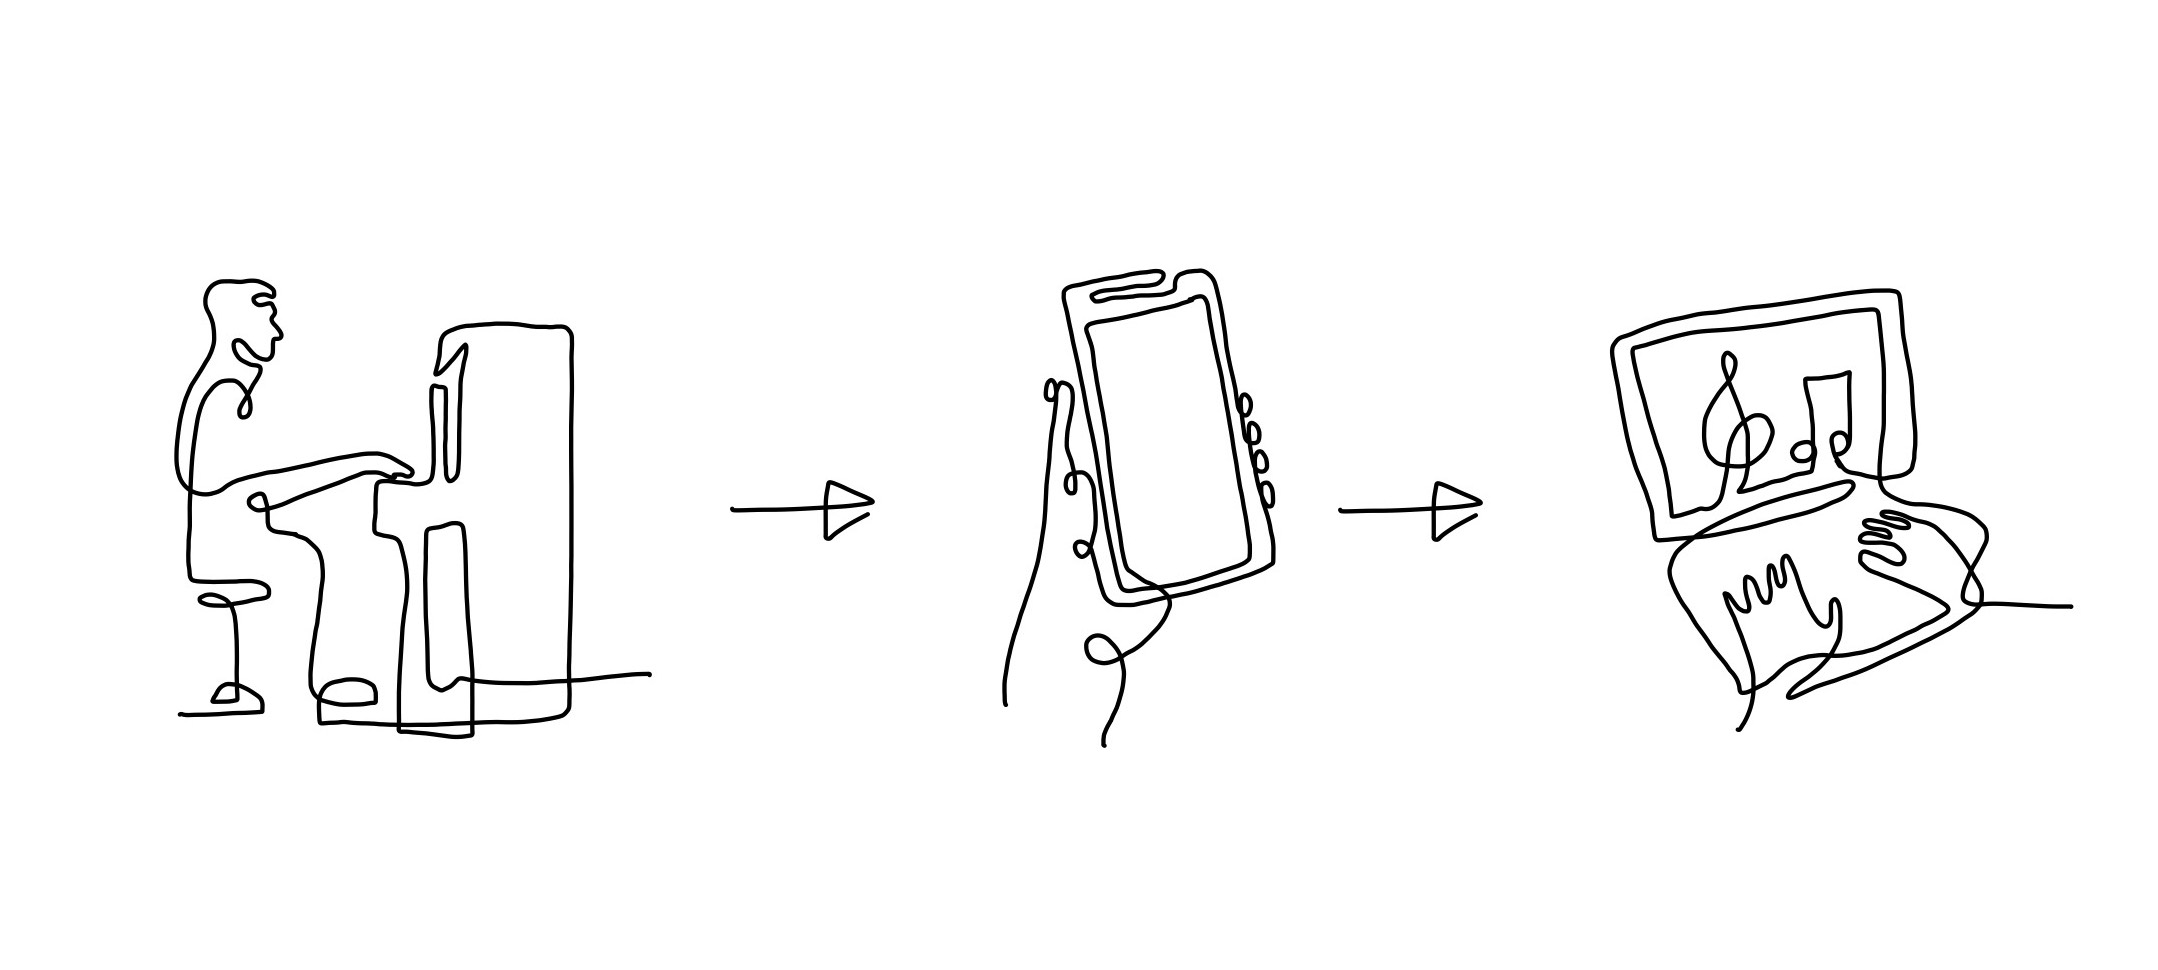 A diagram of how to use MakeItMIDI: play piano, record on phone, transmits to computer.